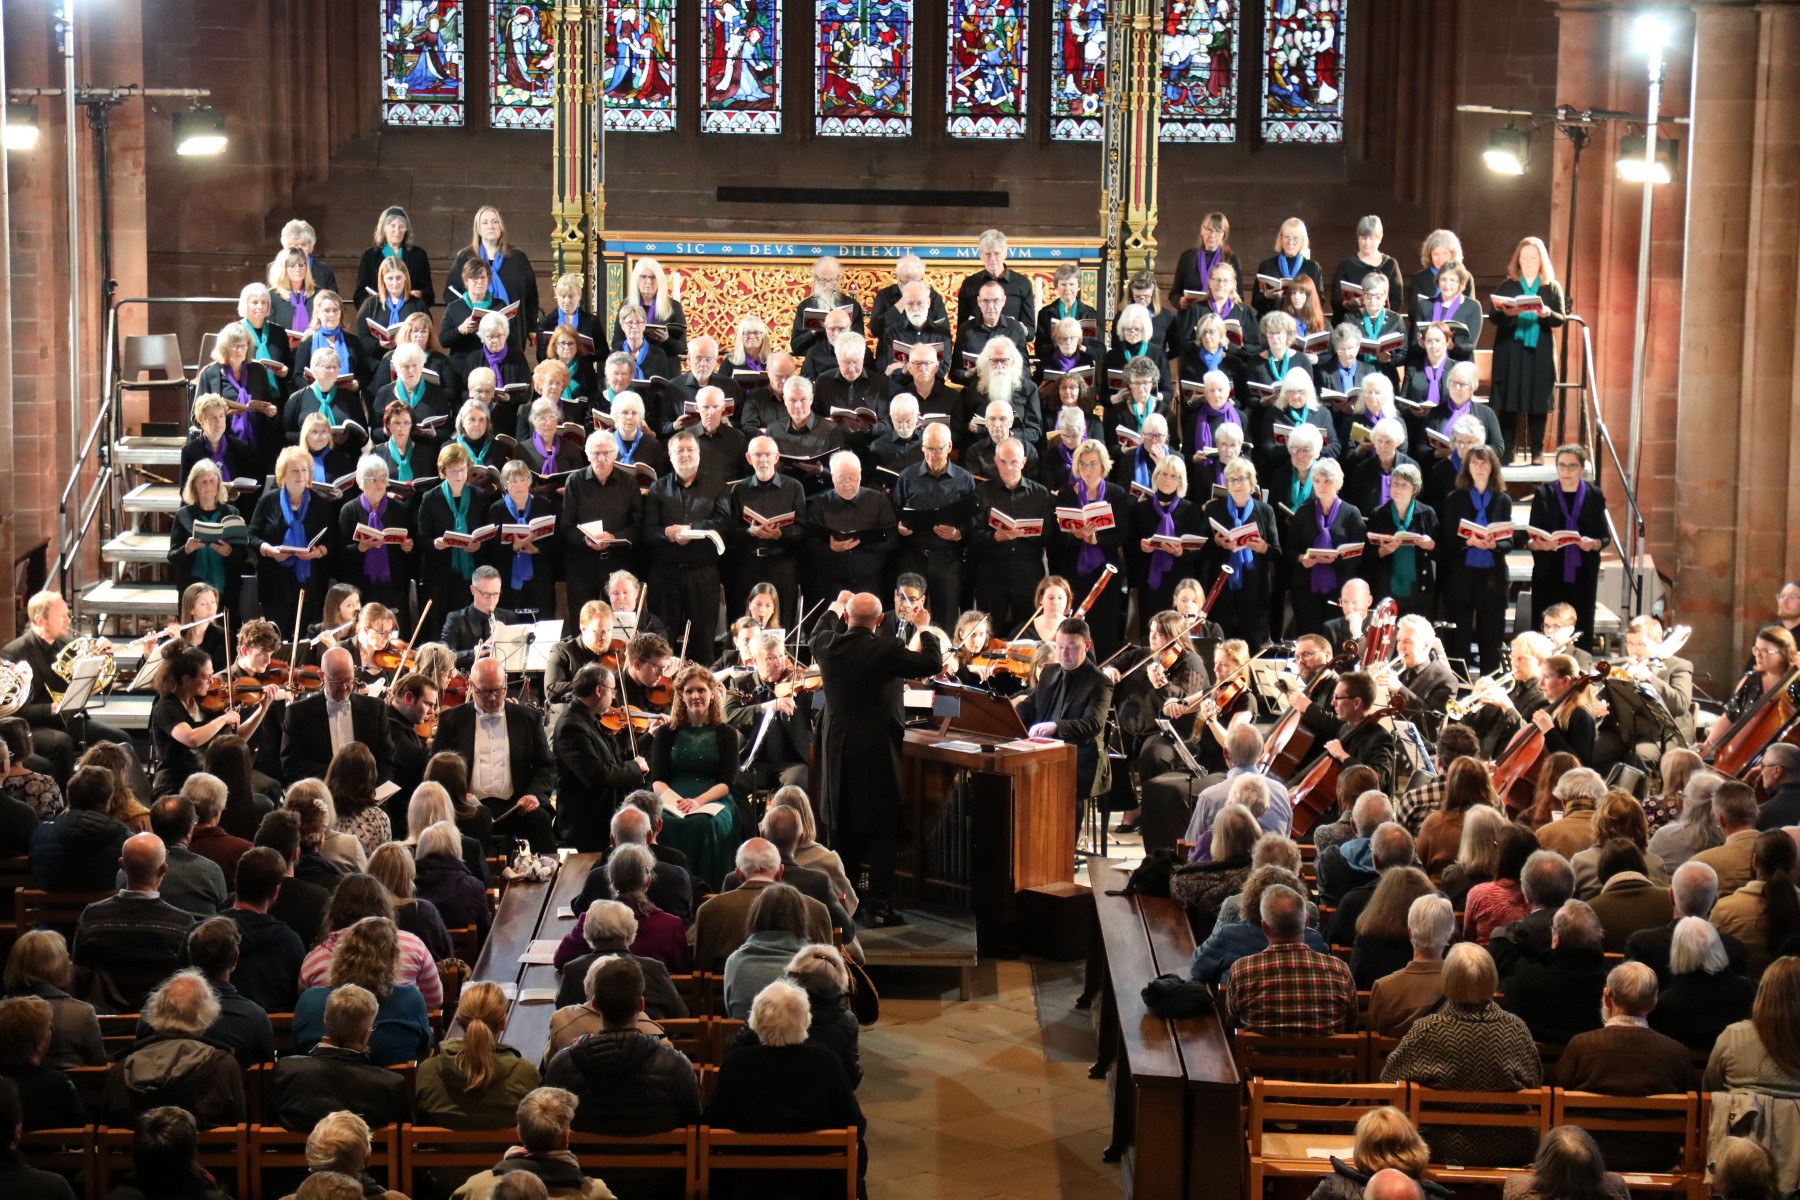 Cumbria Singers, soloists and orchestra with conductor Andrew Padmore